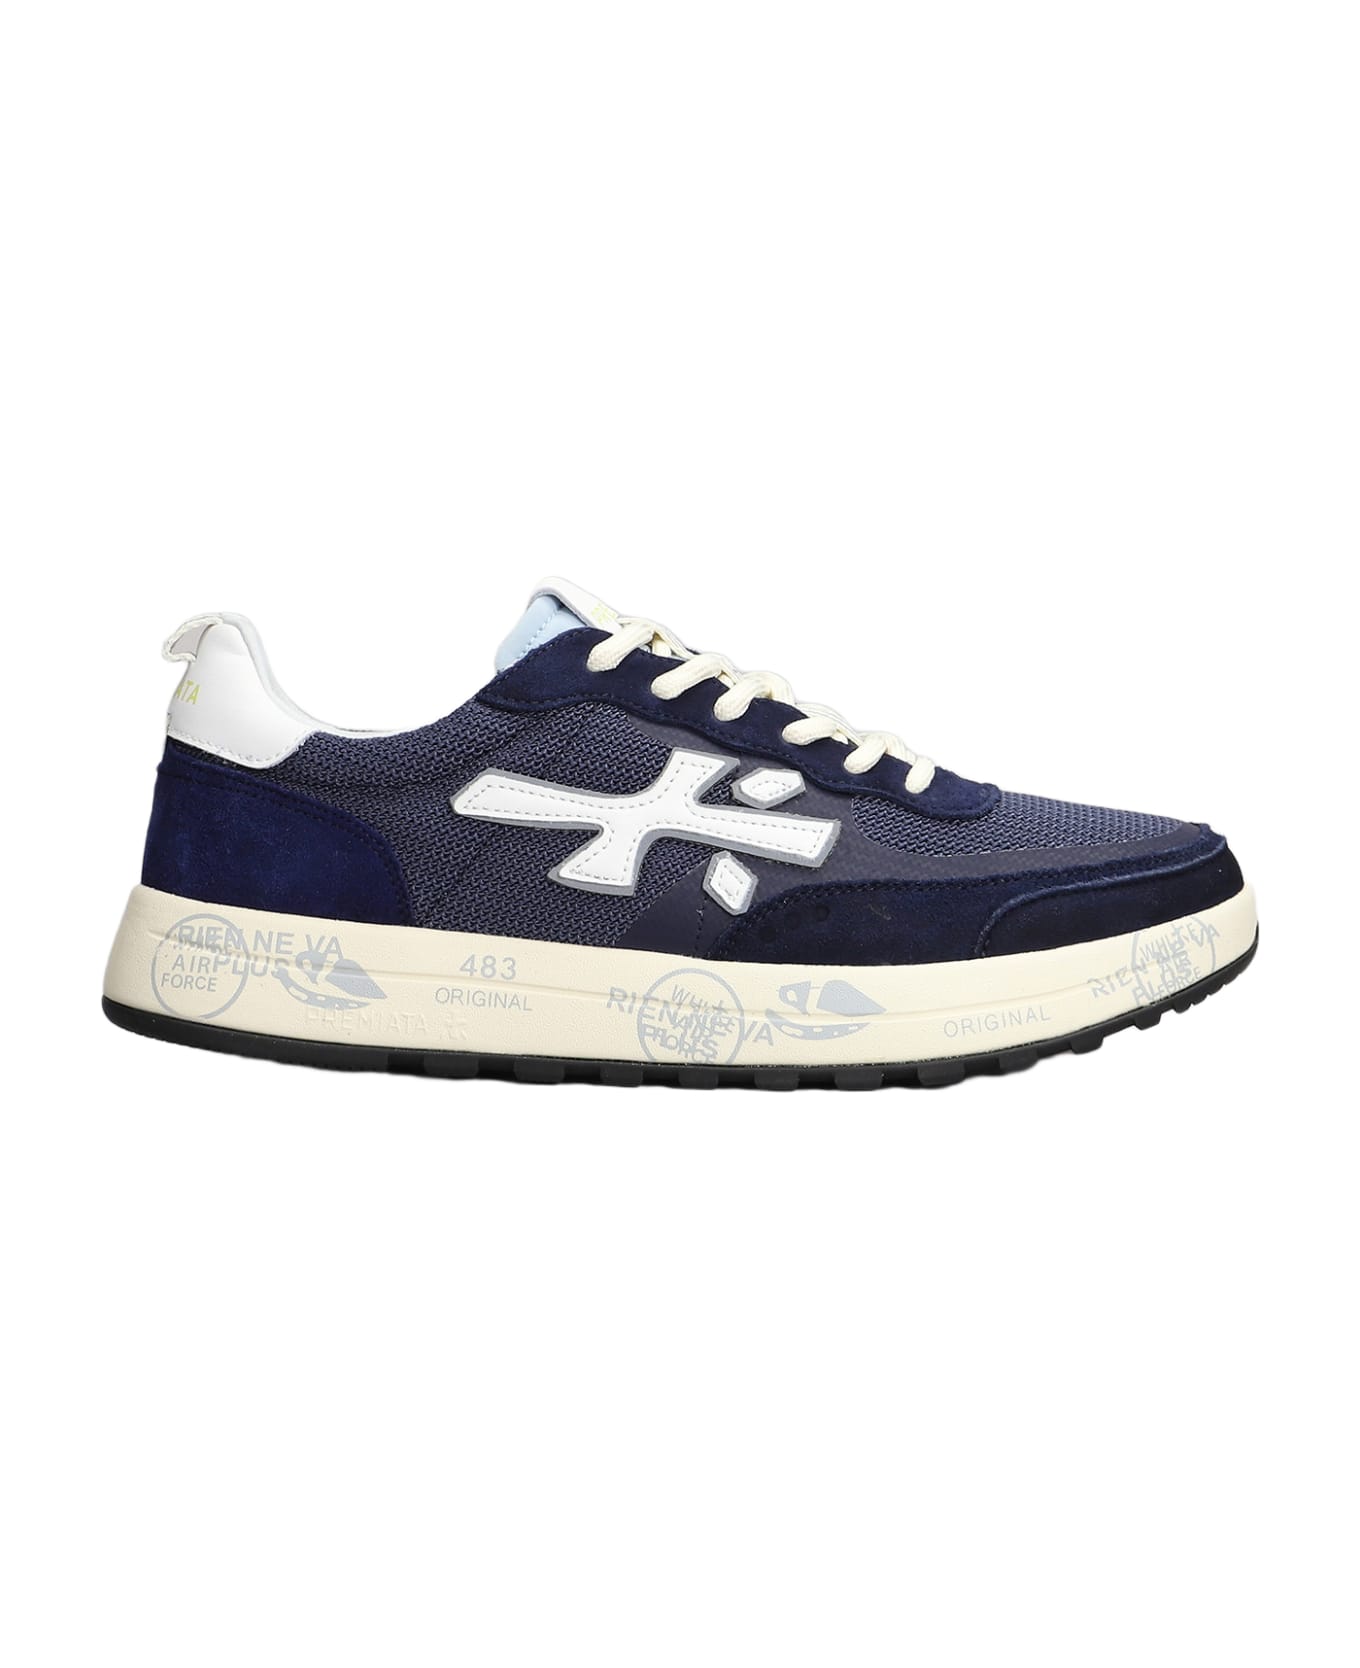 Premiata Nous Sneakers In Blue Suede And Fabric - blue